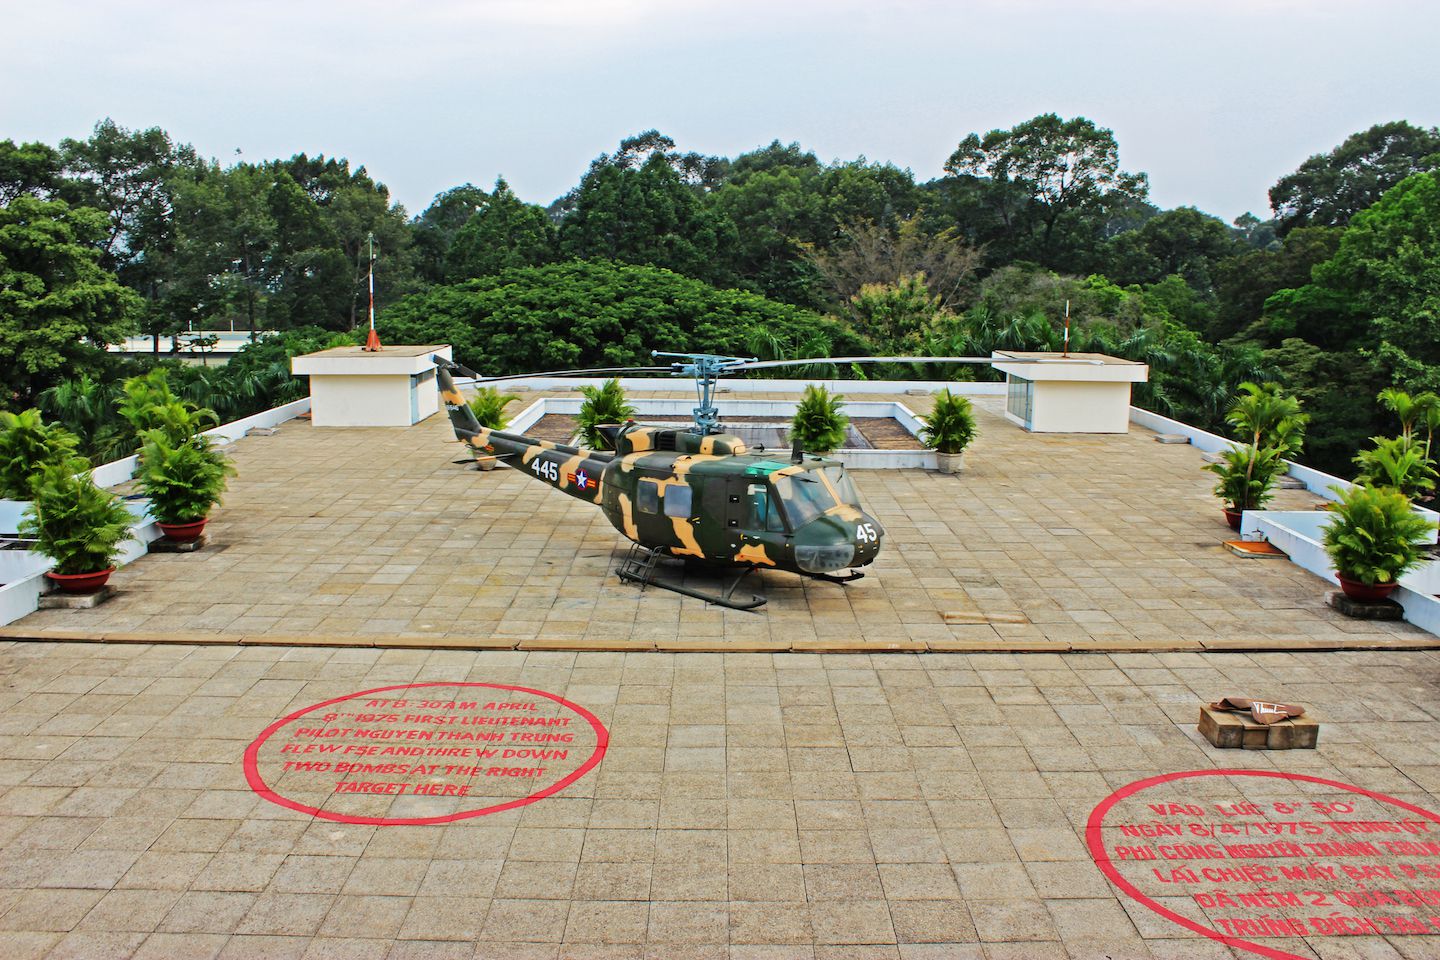 Helipad at the Independence Palace